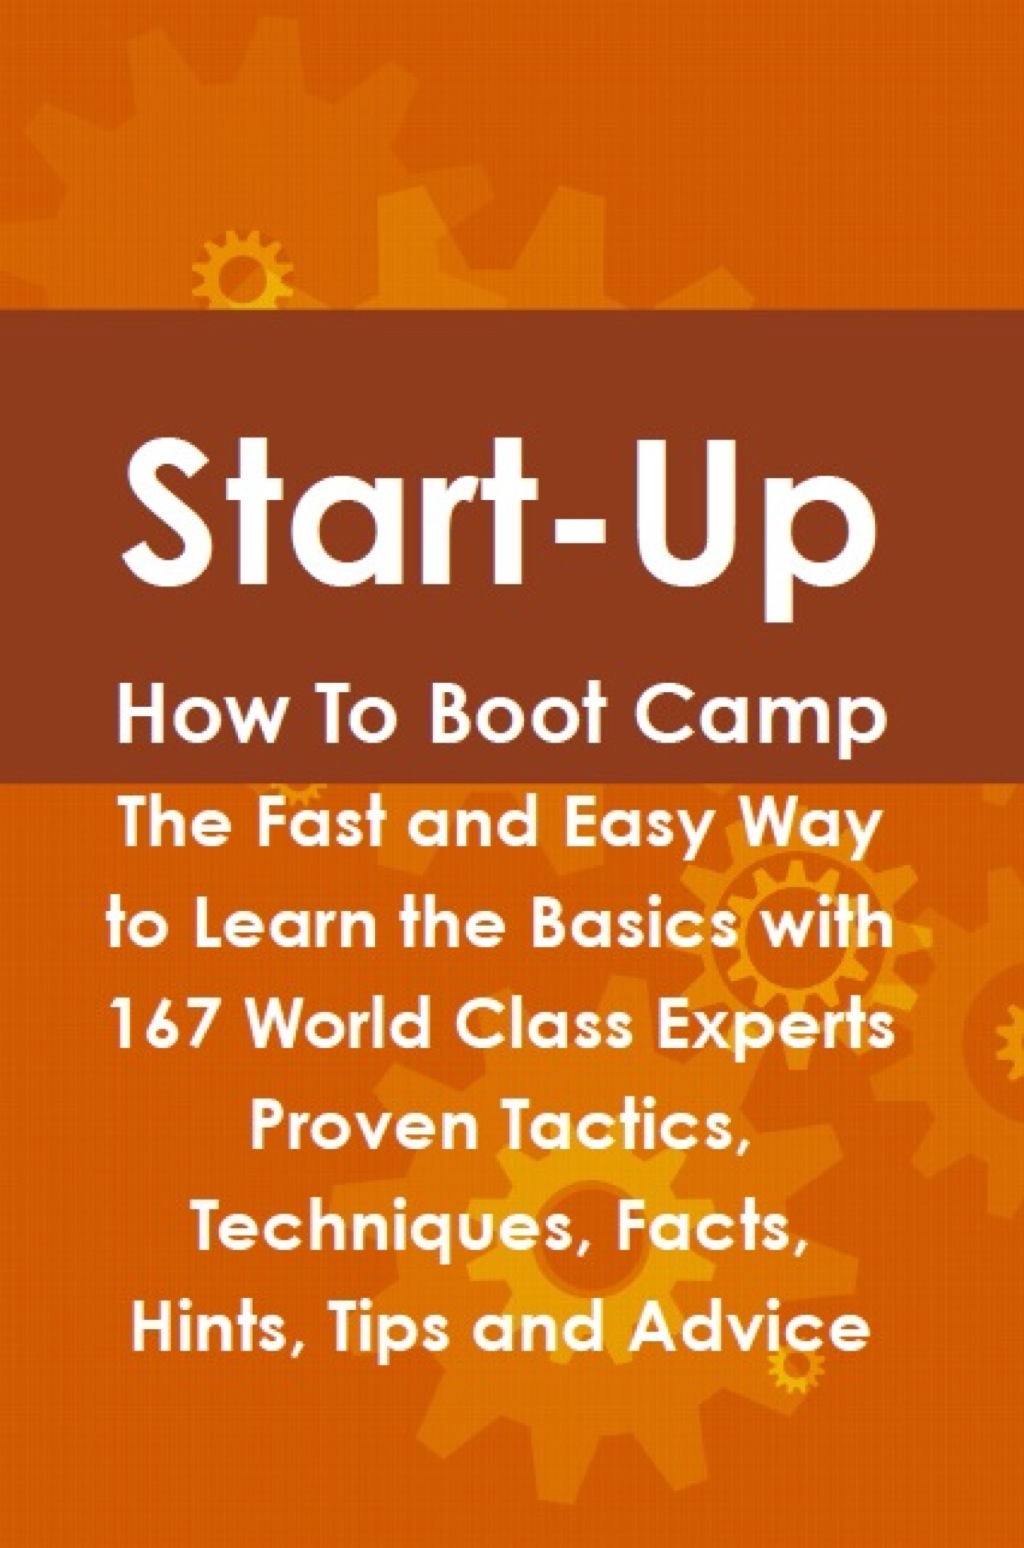 Start-Up How To Boot Camp: The Fast and Easy Way to Learn the Basics with 167 World Class Experts Proven Tactics  Techniq (eBook) - Jeff Murdoch,